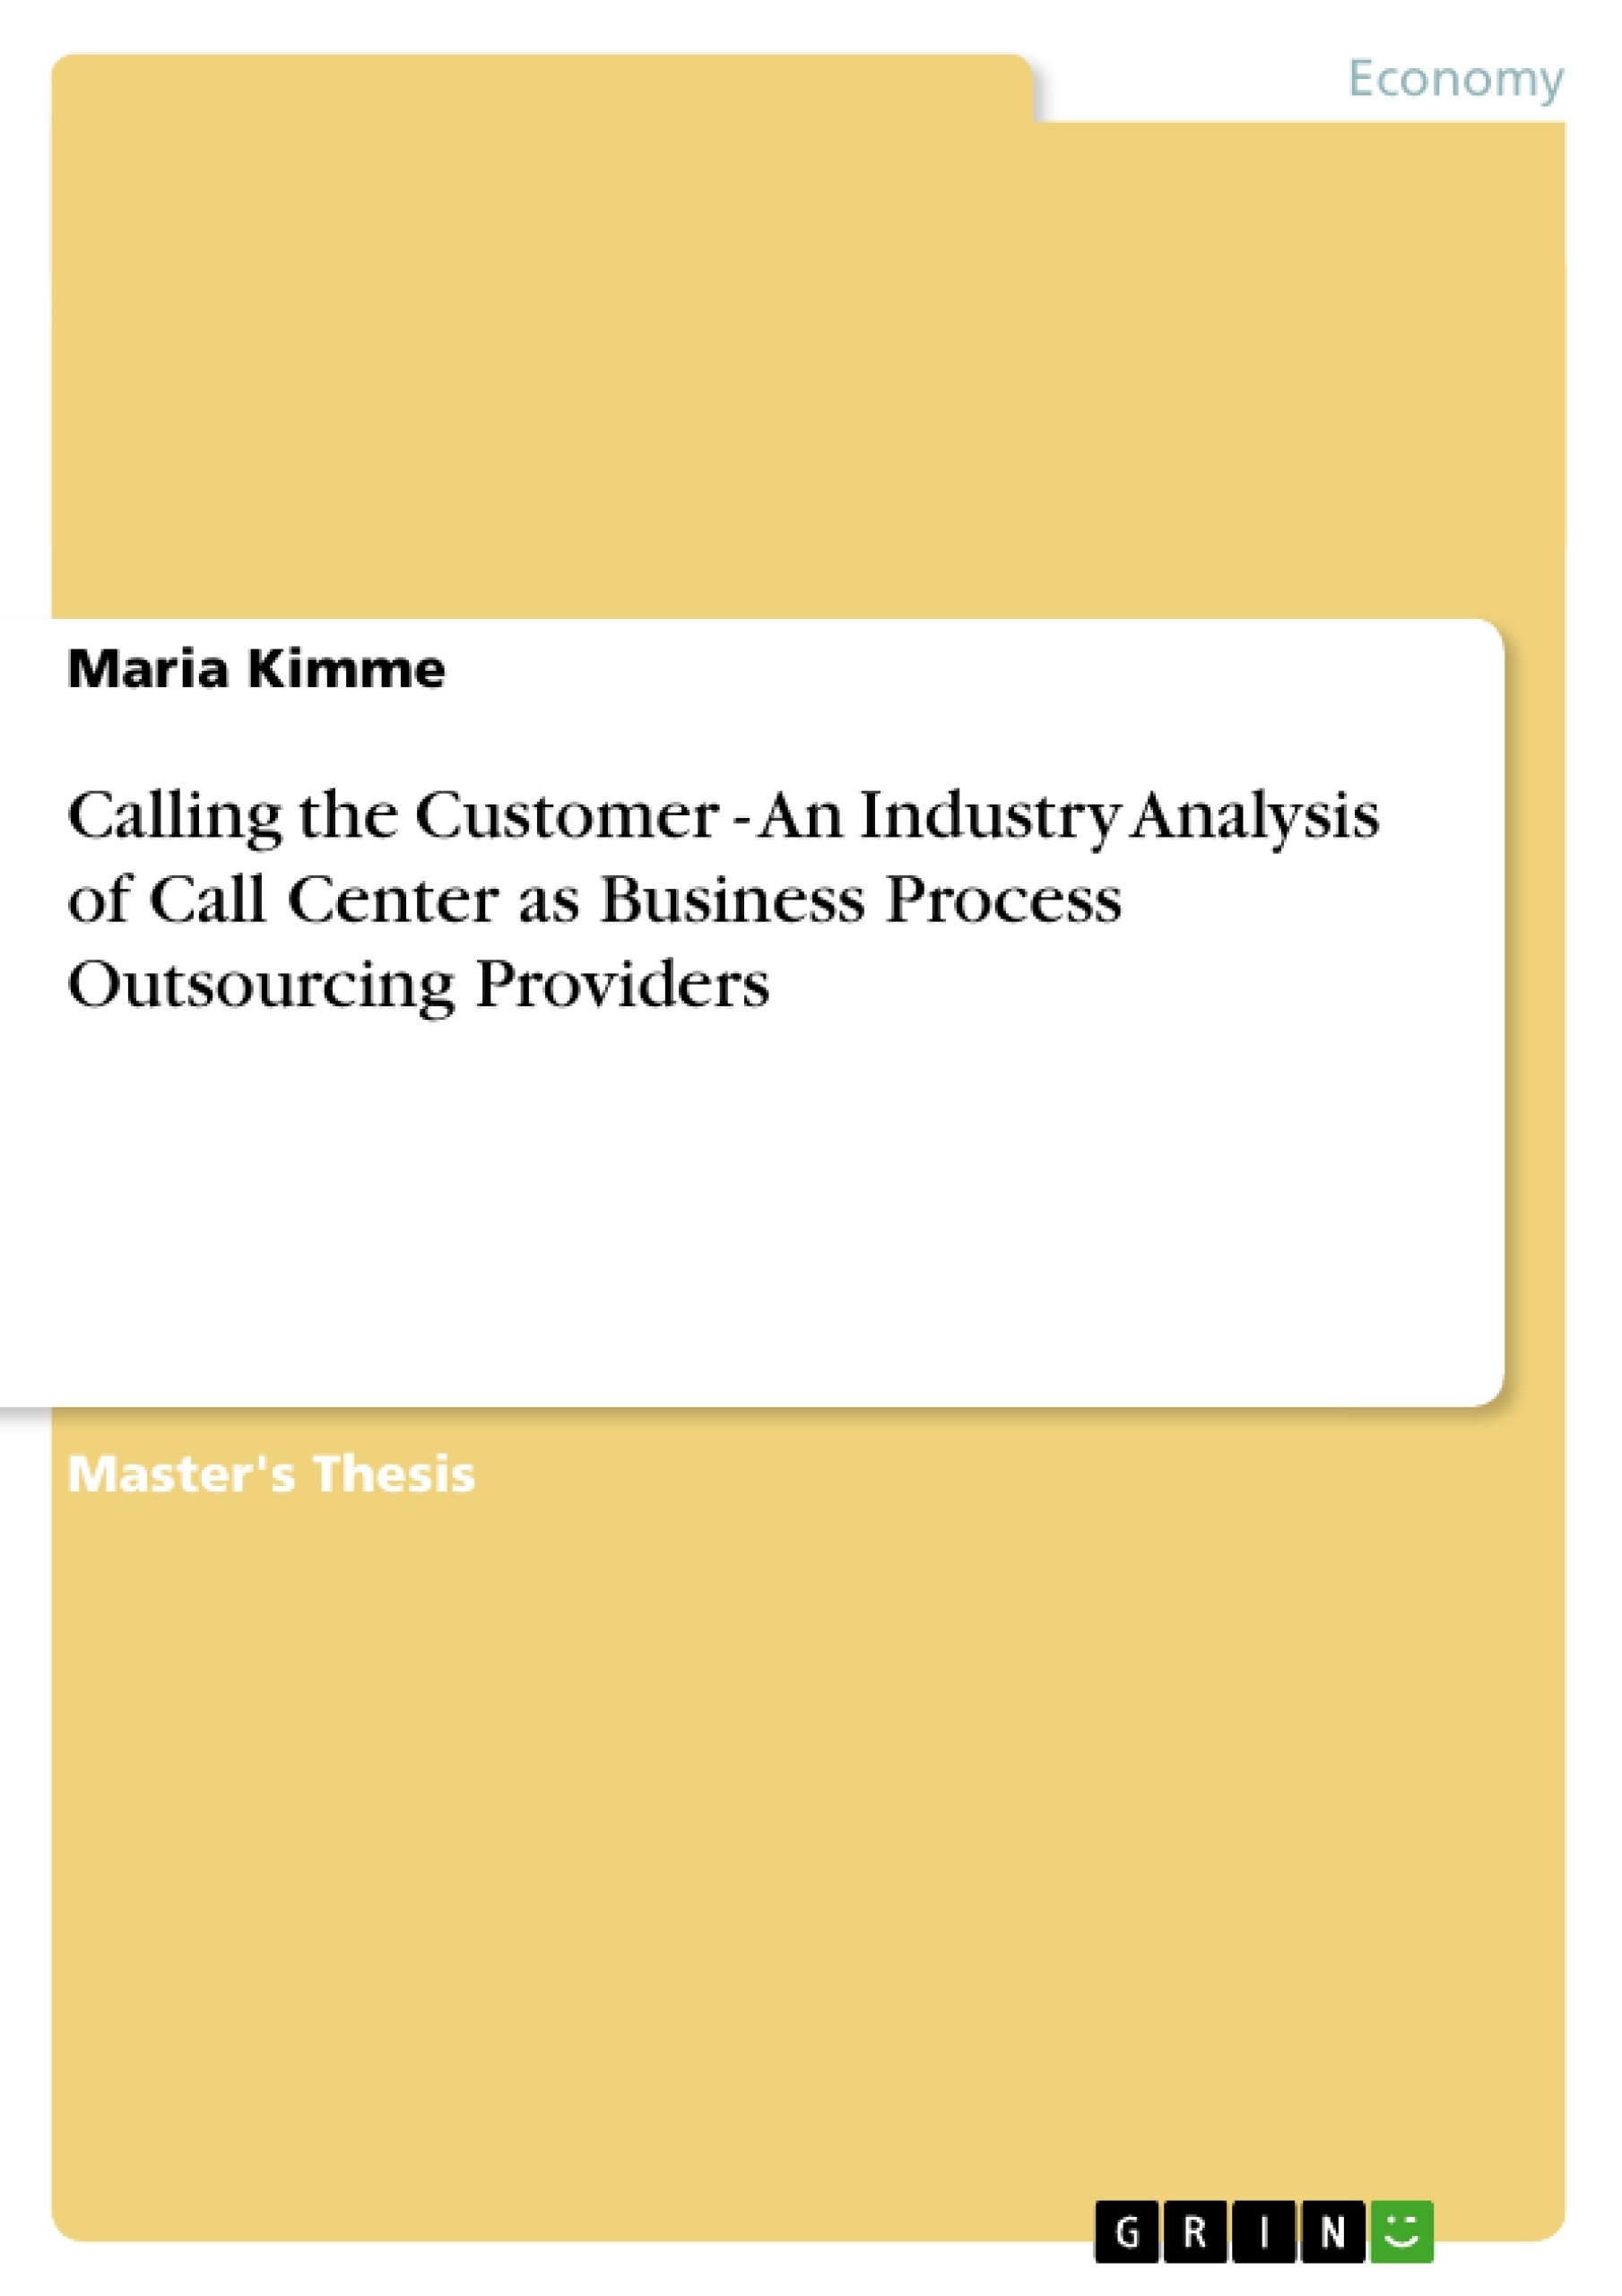 Title: Calling the Customer - An Industry Analysis of Call Center as Business Process Outsourcing Providers